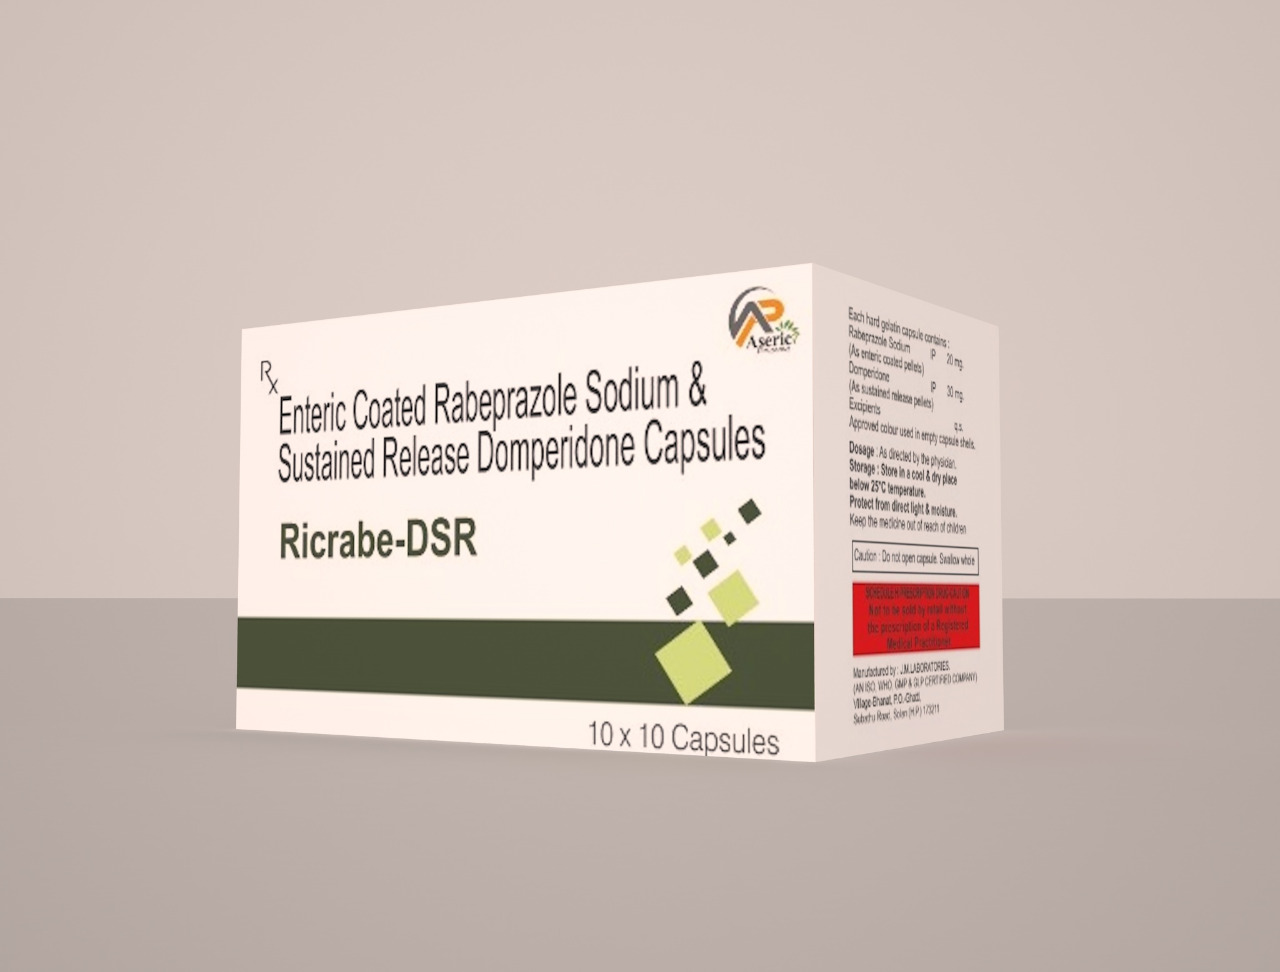 Product Name: Ricrabe DSR, Compositions of Ricrabe DSR are Enteeric Coated Rabeprazole Sodium & Sustained Release Domperidone Capsules - Aseric Pharma